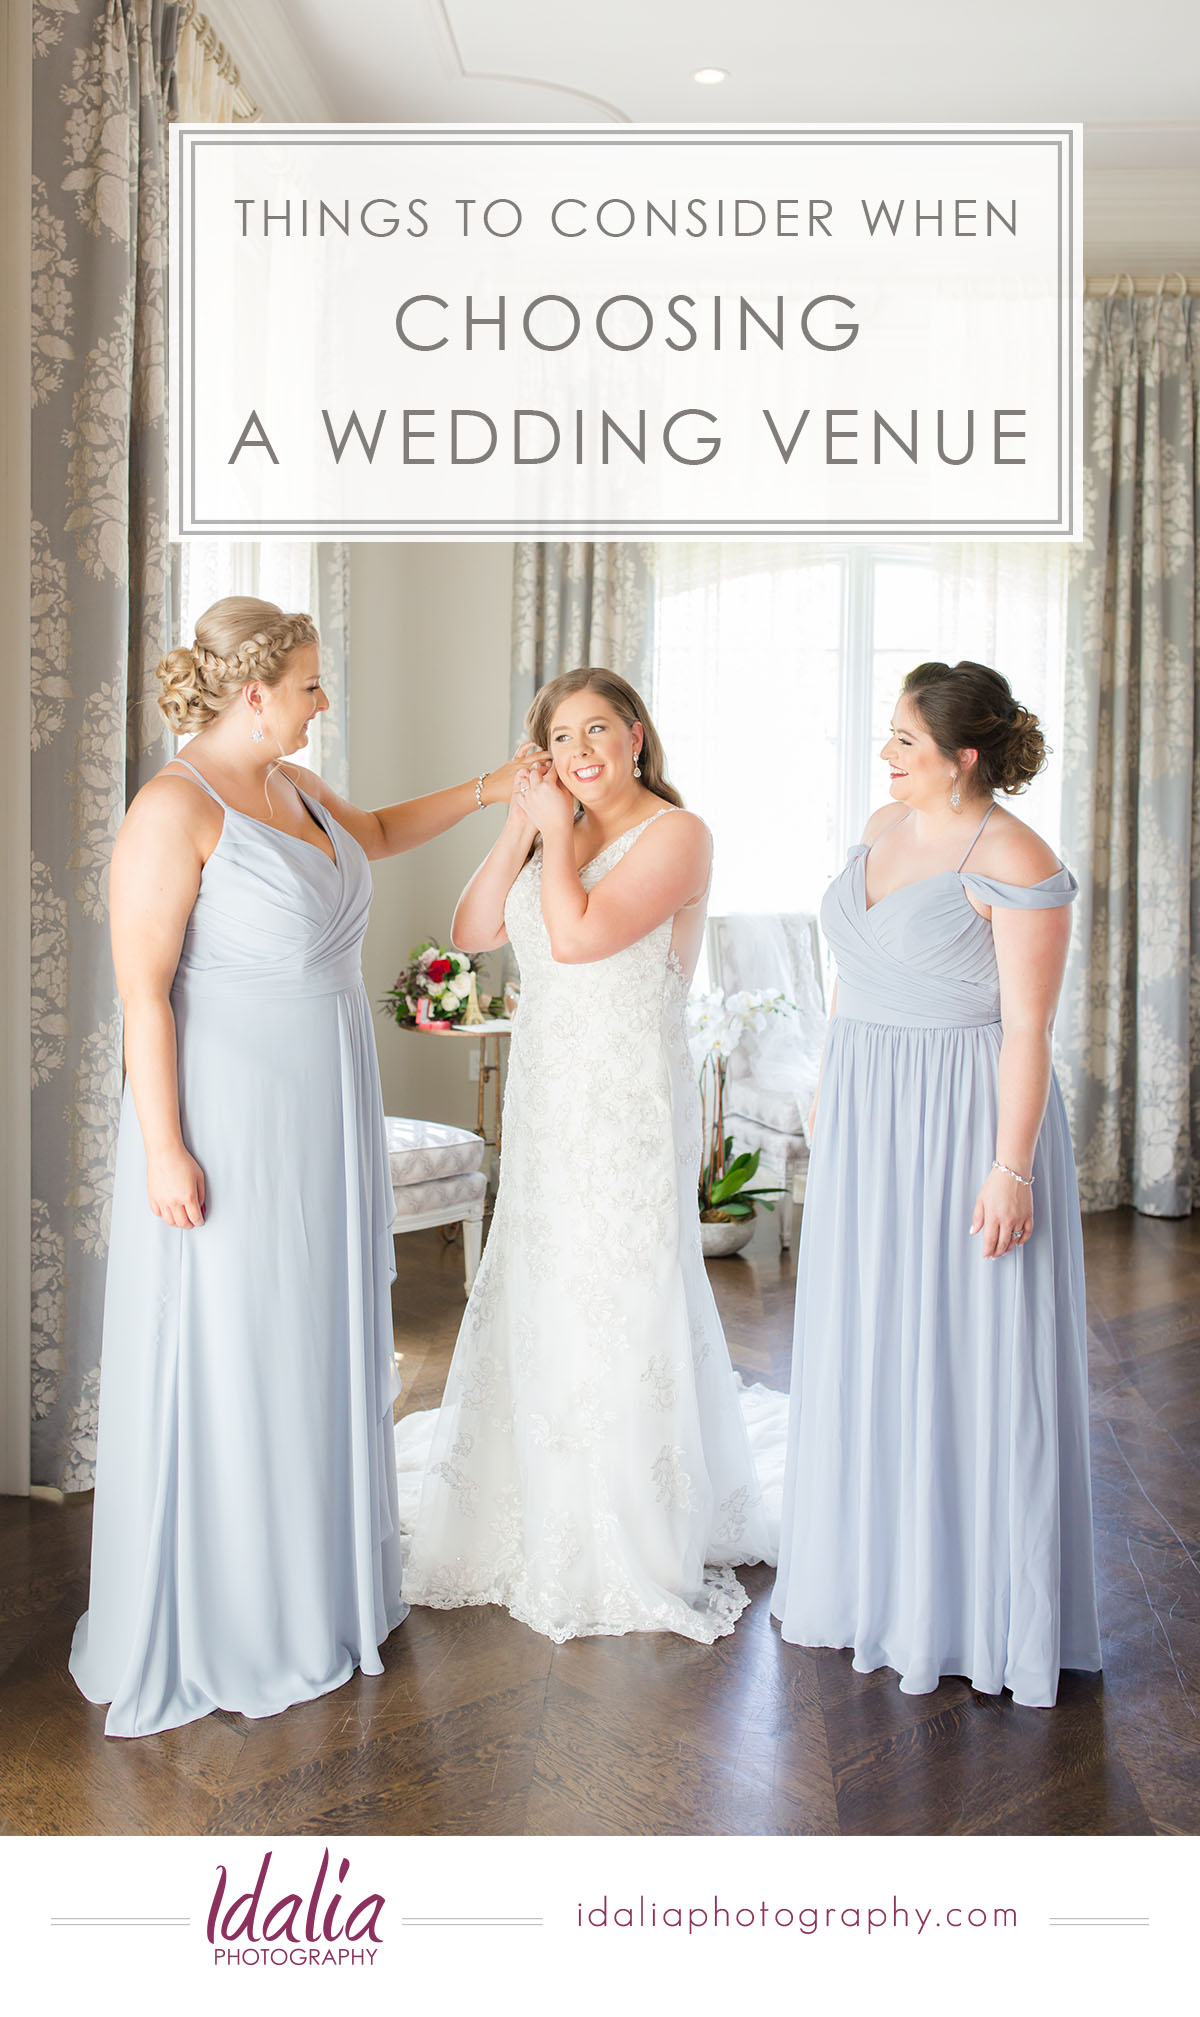 Things to Consider When Choosing a Wedding Venue | Tips for Brides